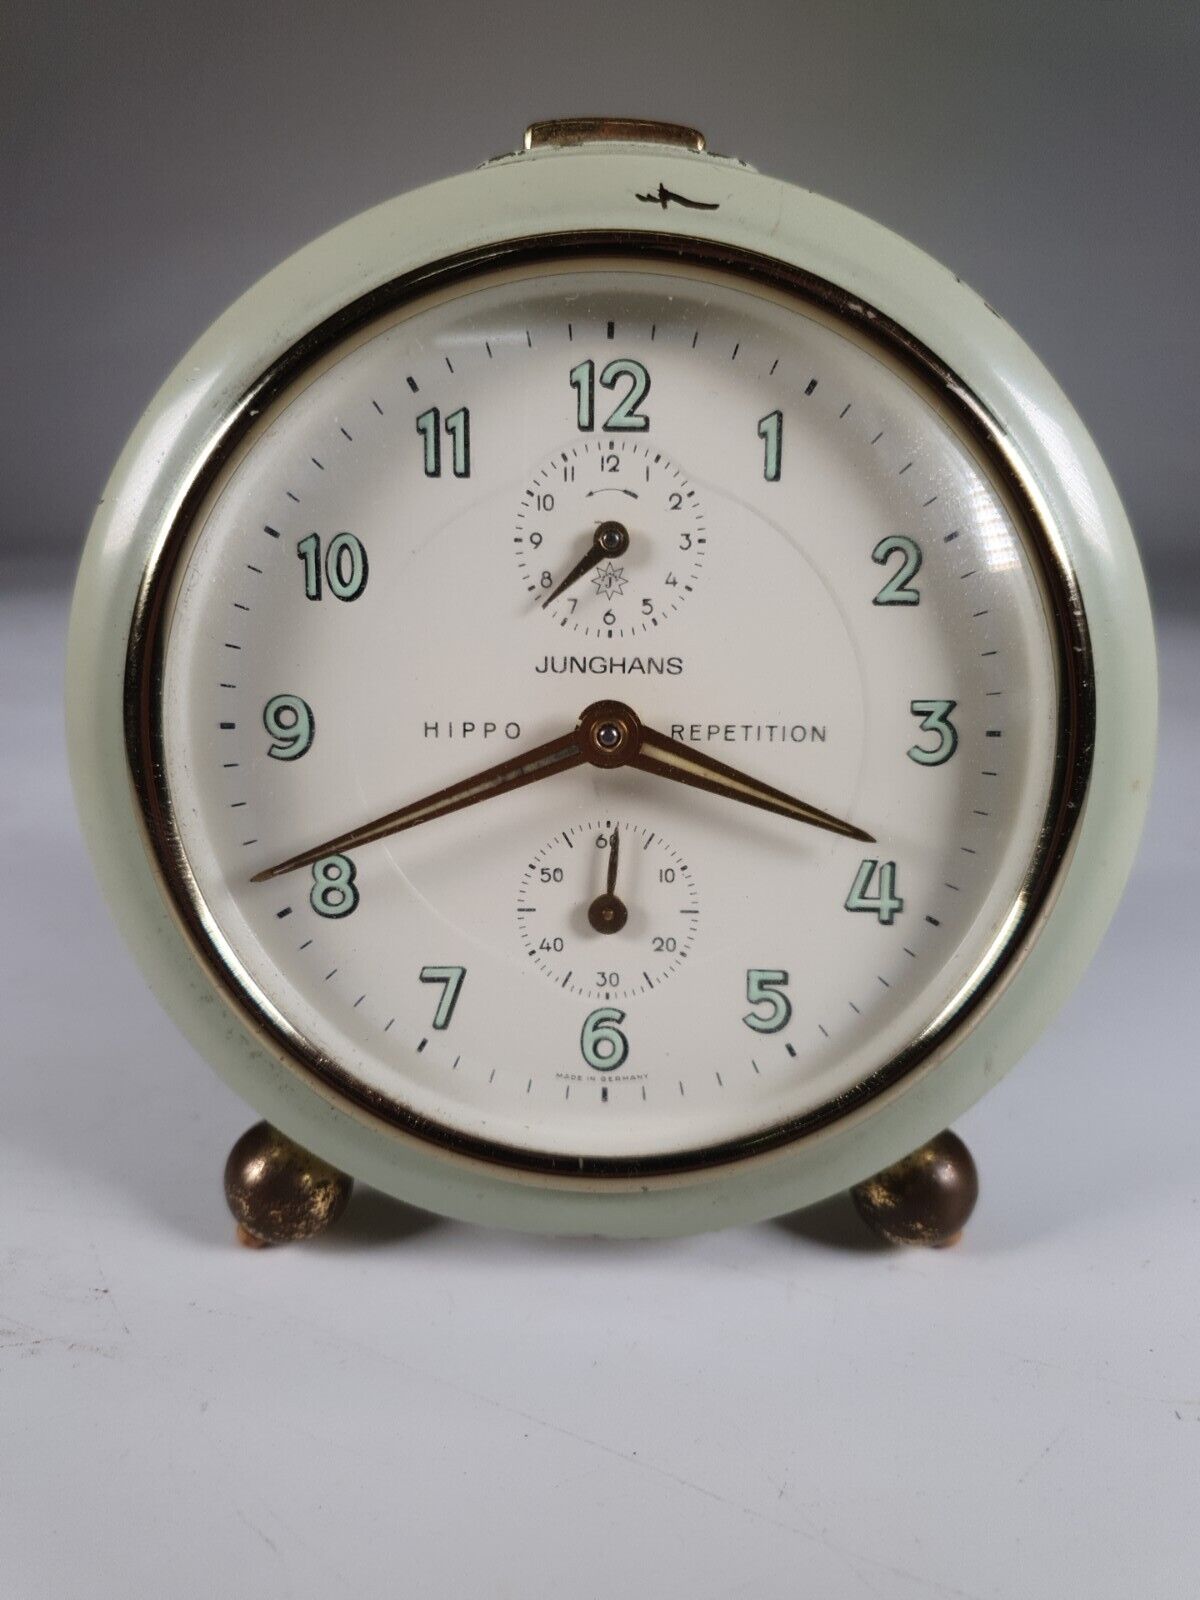 JUNGHANS Hippo Repetition Vintage Alarm Clock Made In Germany